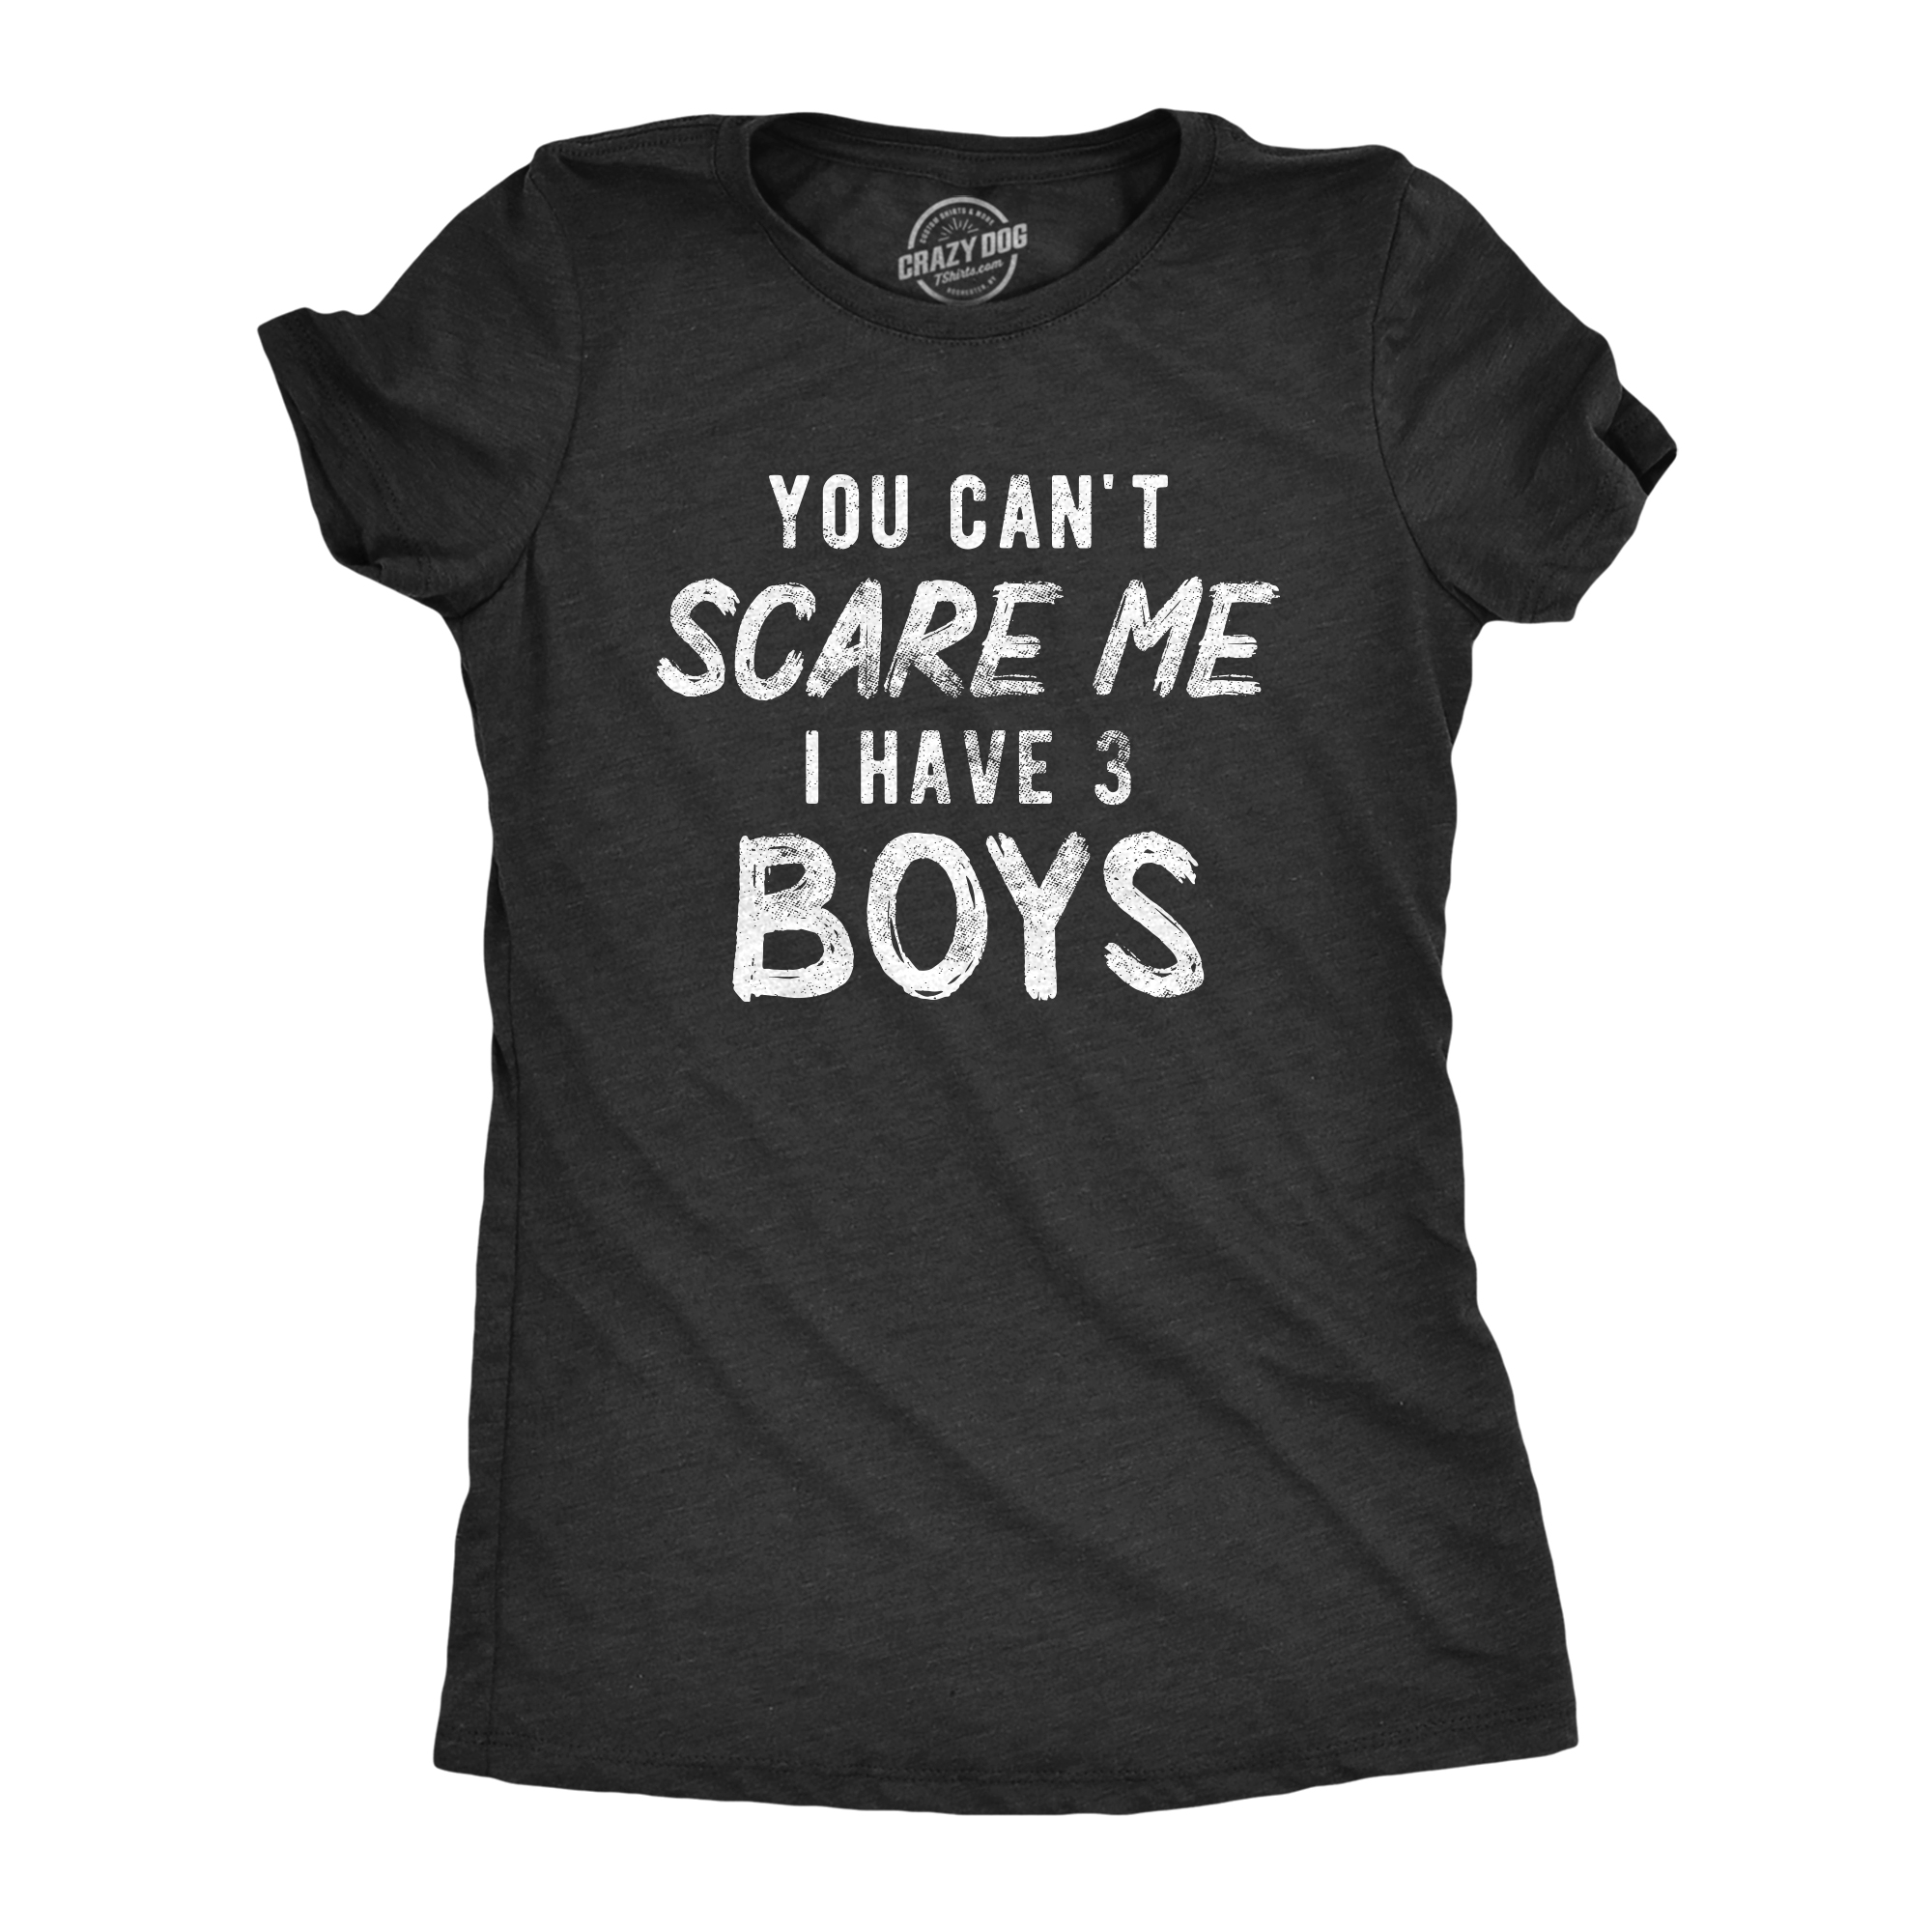 Crazy Dog Tshirts Womens You Can't Scare Me I Have Three Boys Tshirt Funny Parenting Mothers Day Tee